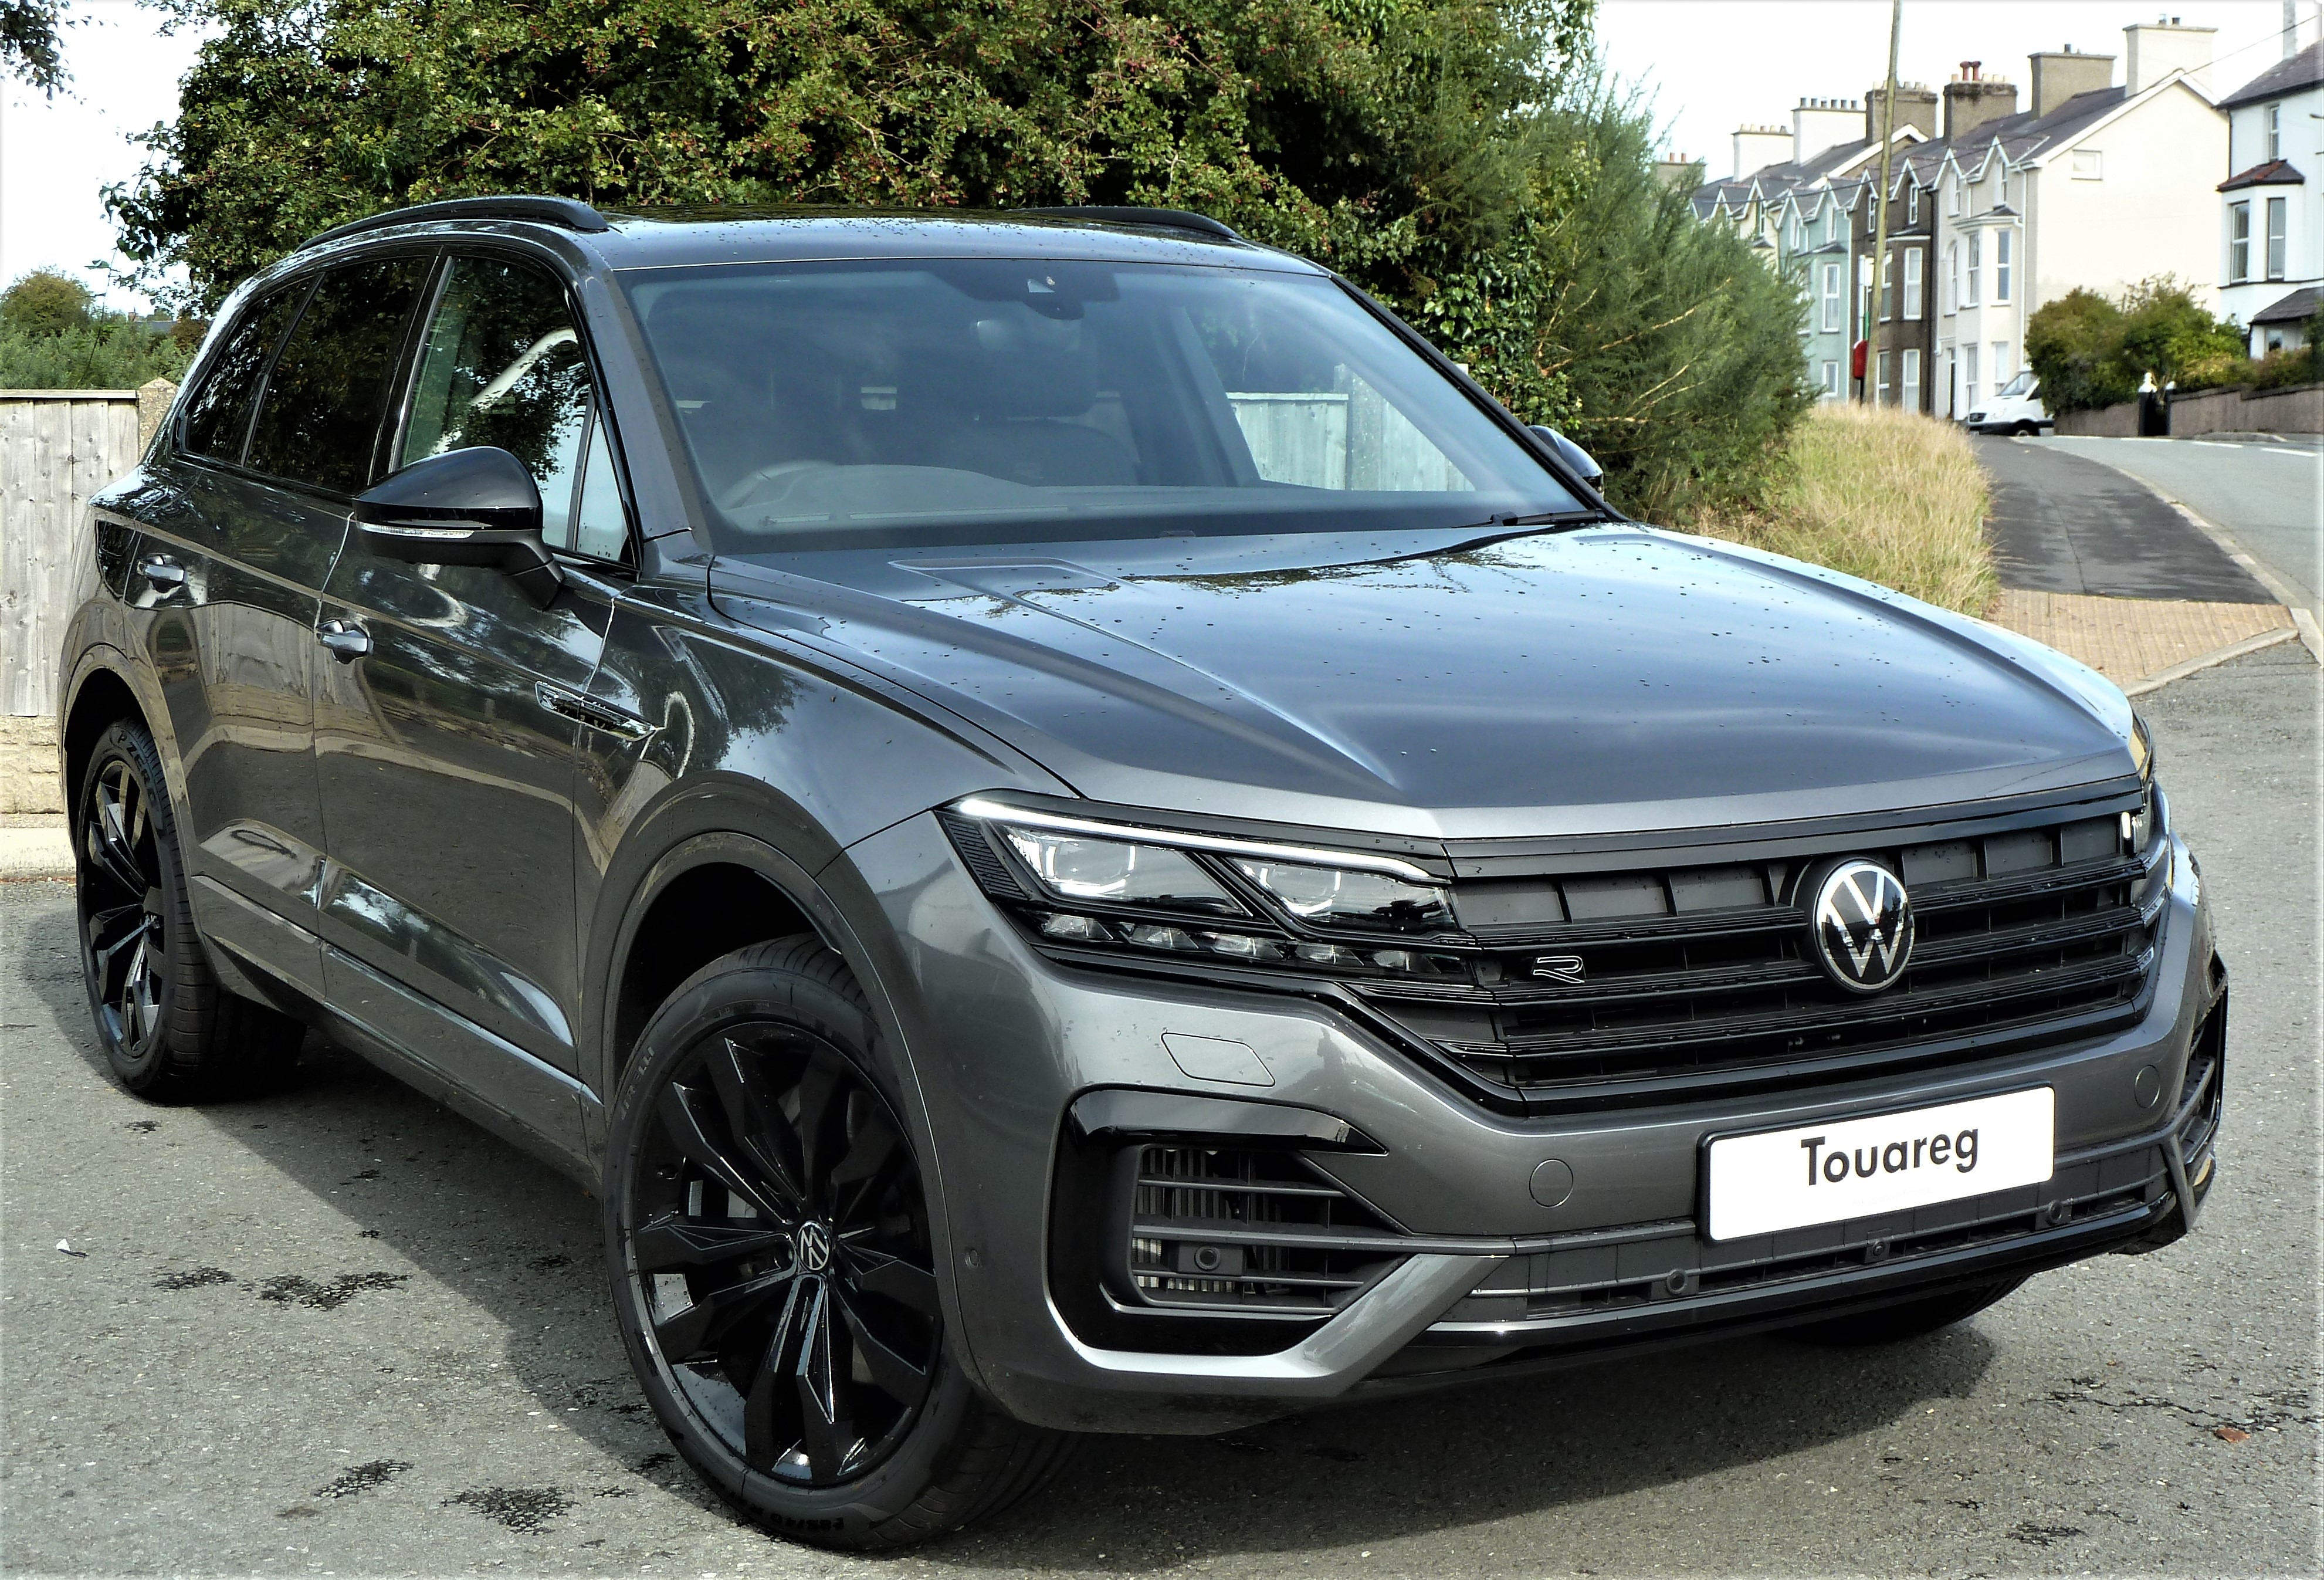 New TOUAREG available from stock today